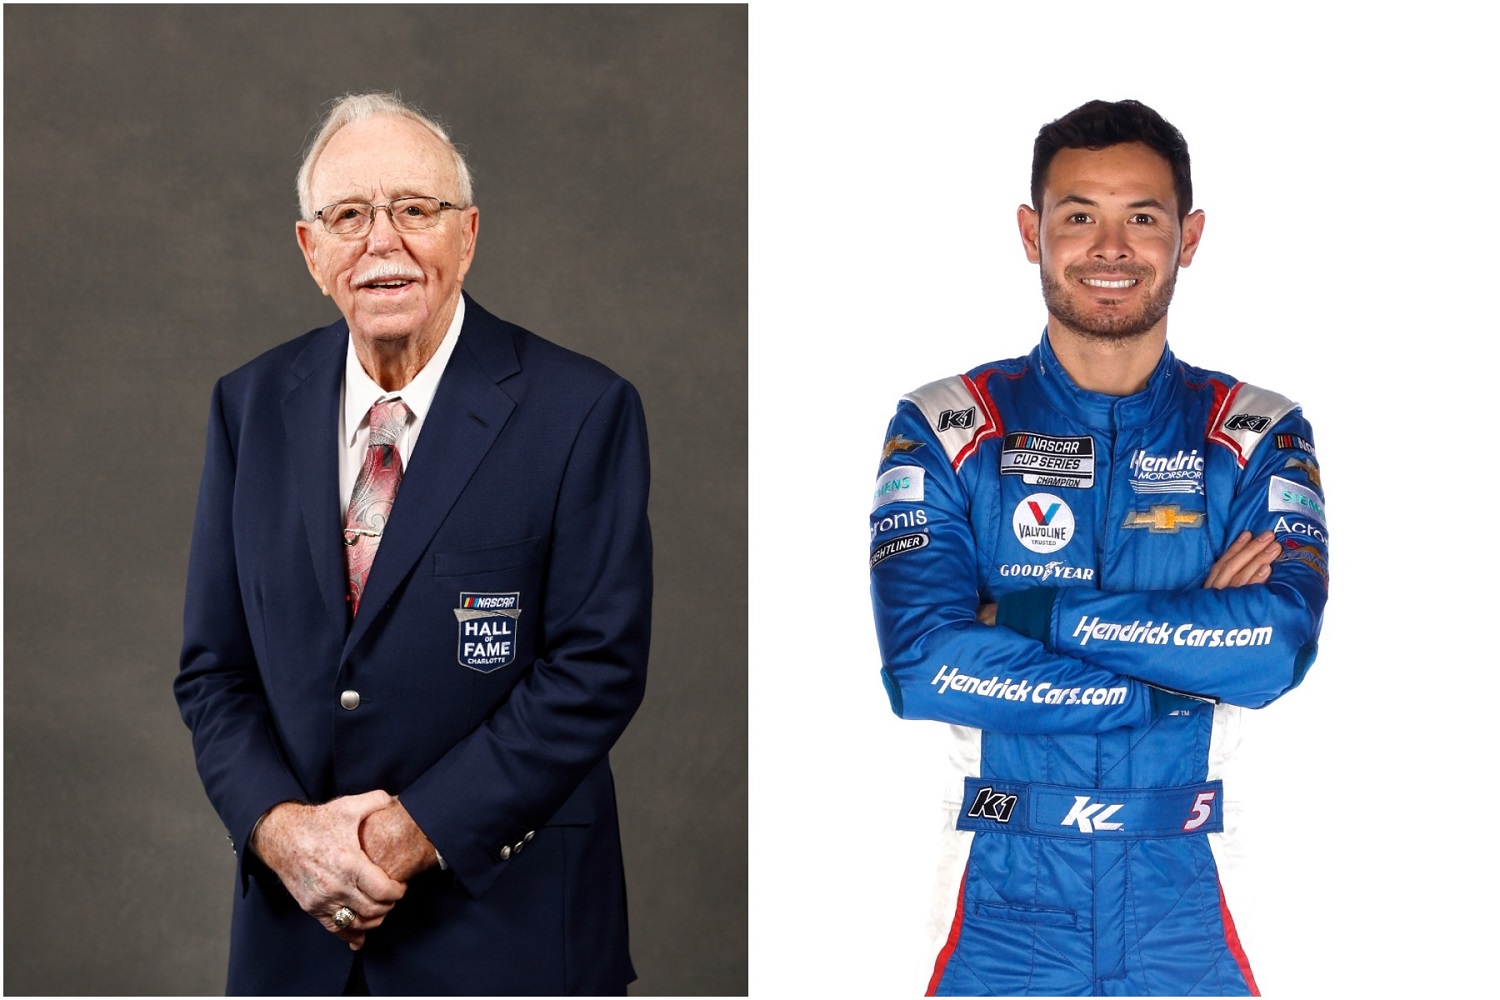 Red Farmer, who was inducted into the NASCAR Hall of Fame on Jan. 21, and 2021 NASCAR Cup Series champion Kyle Larson. | Getty Images